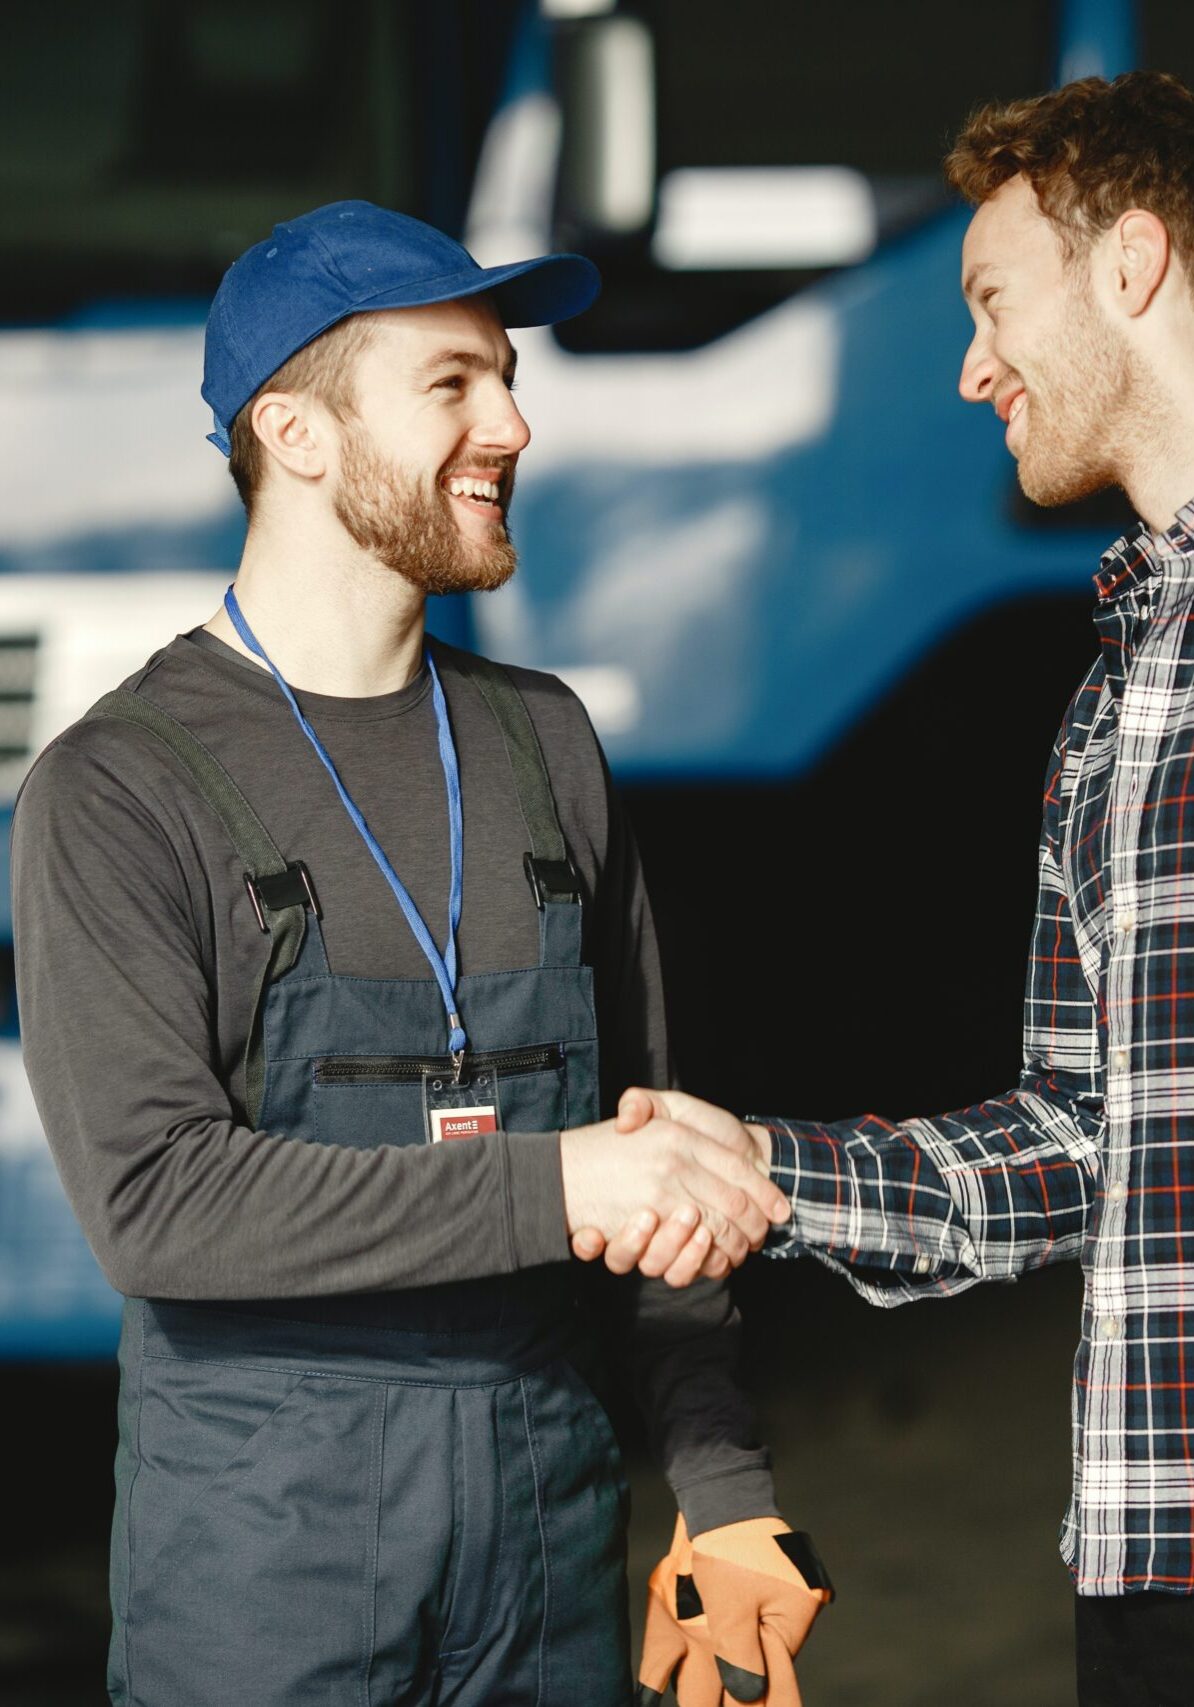 Mechanic and client handshake at an autoshop